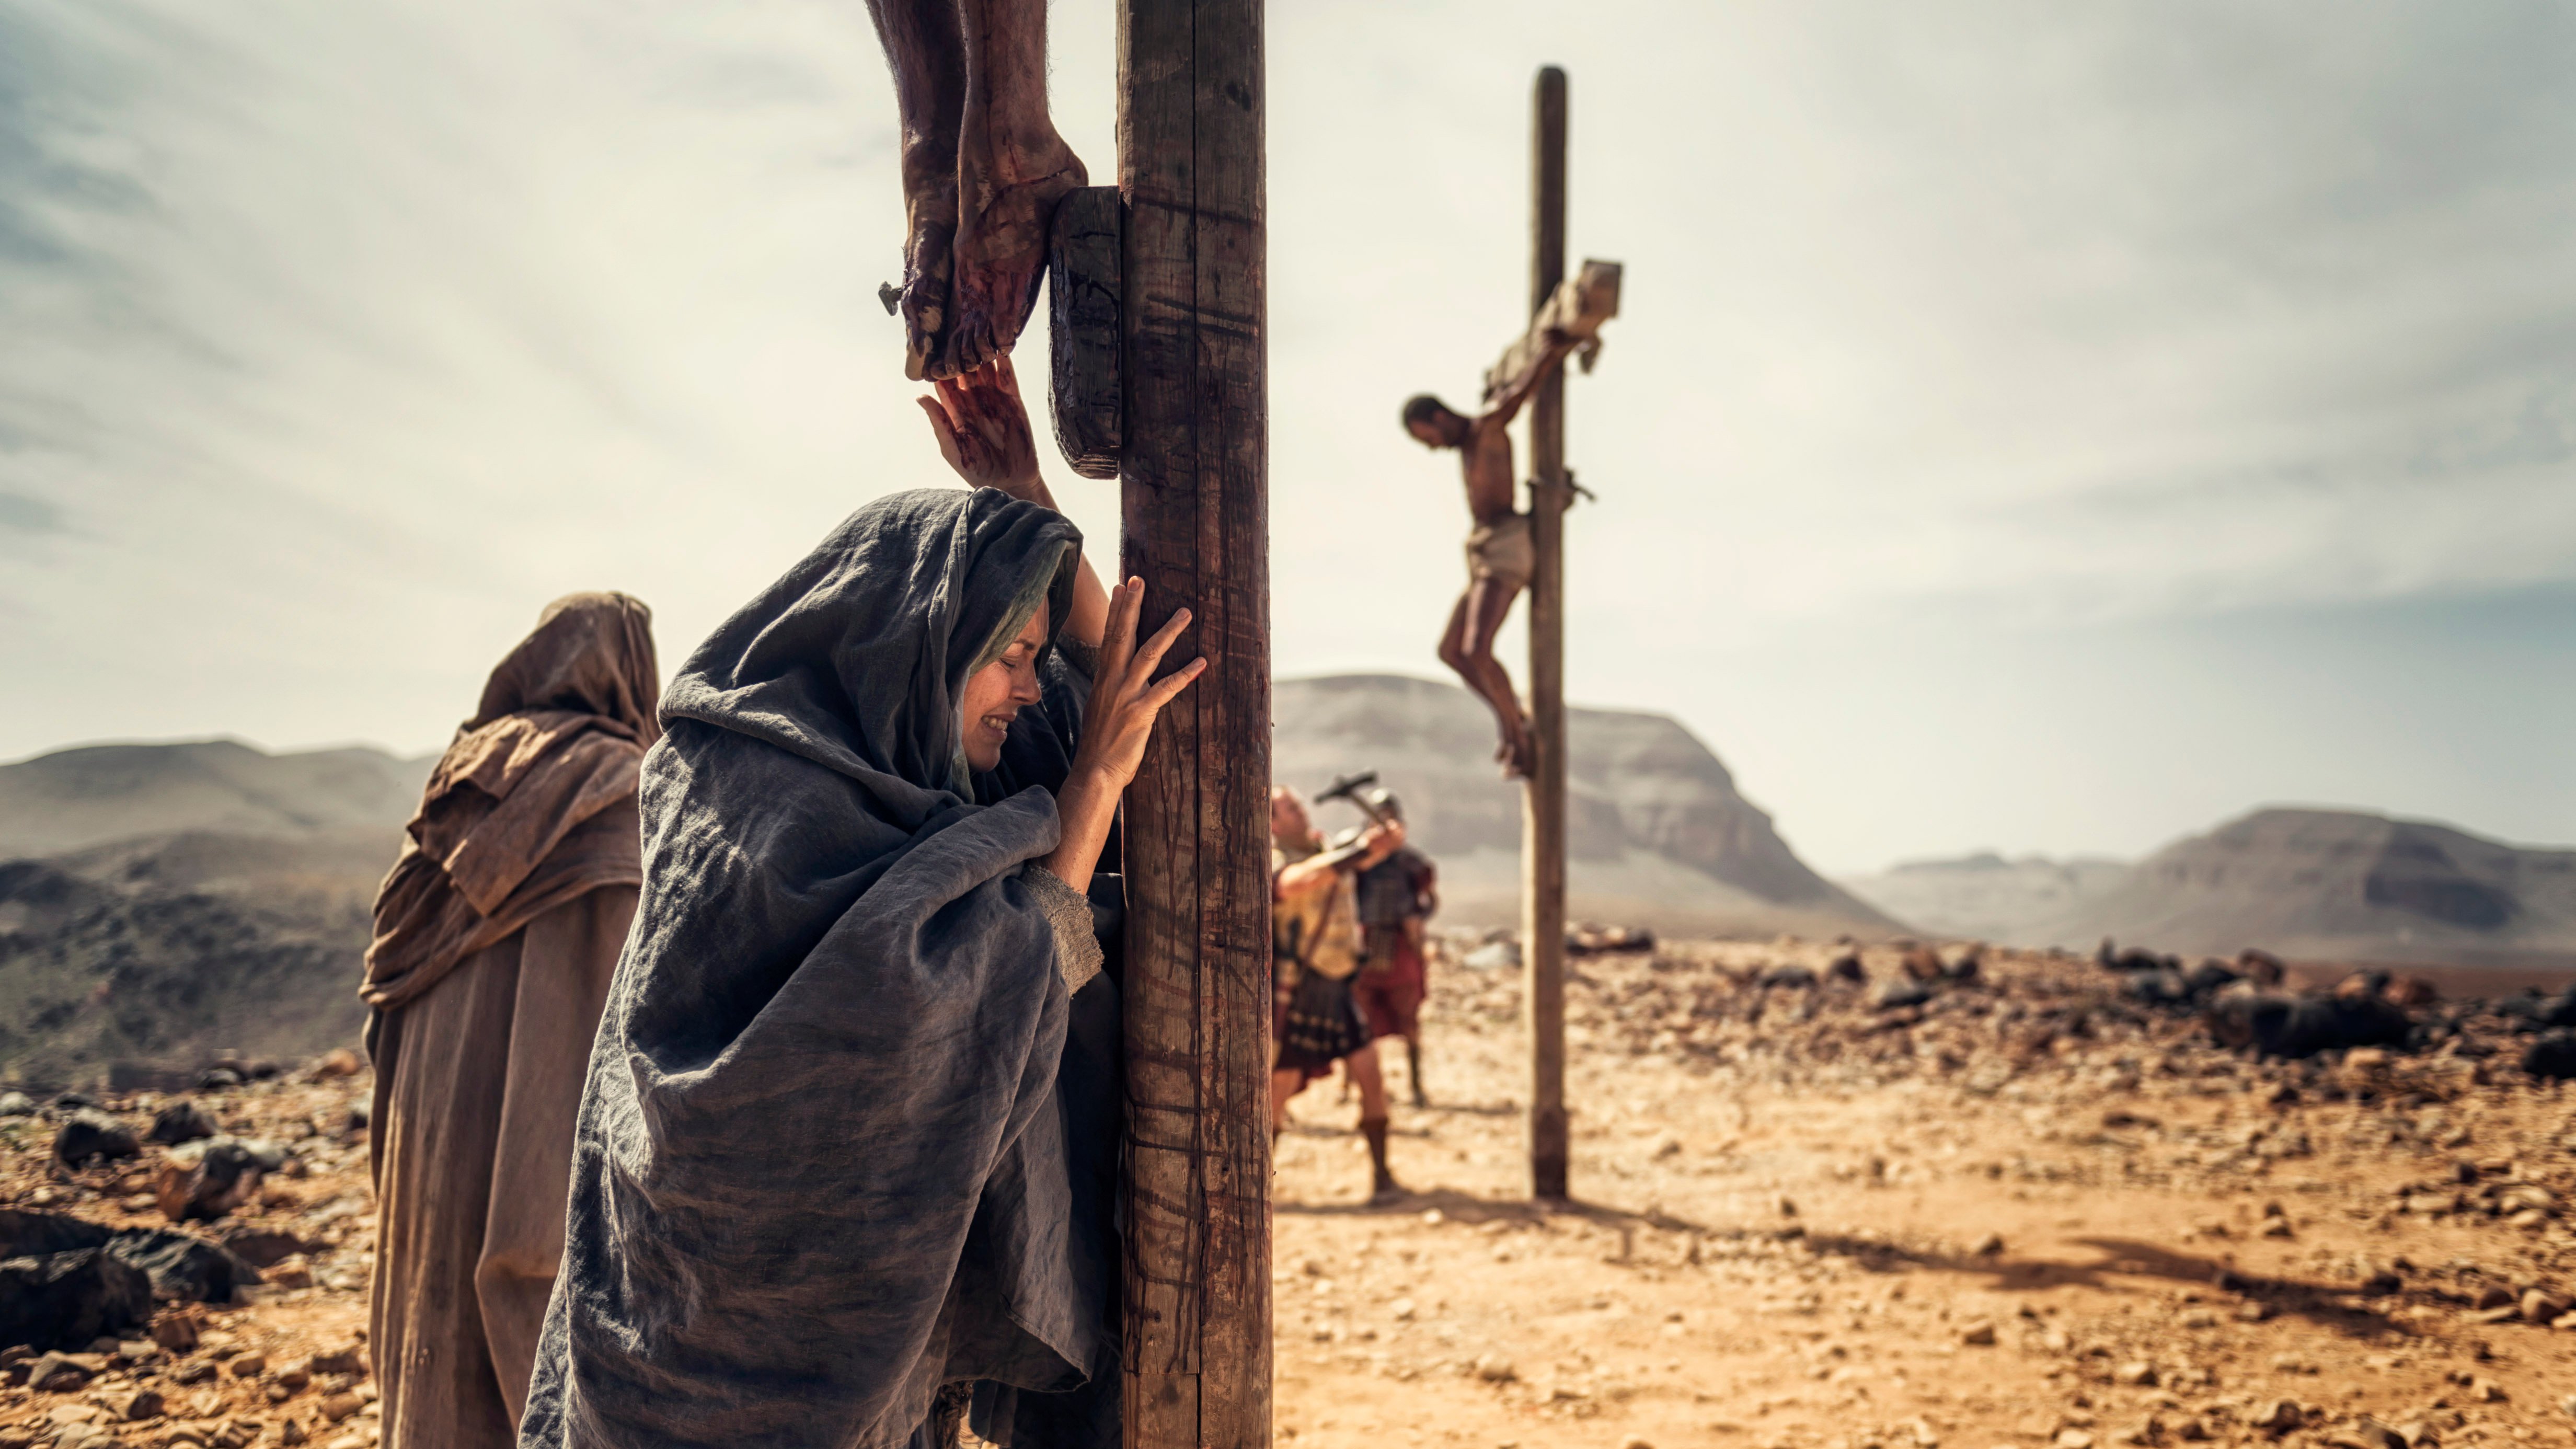 Mary weeping at the foot of the cross. From RESURRECTION movie